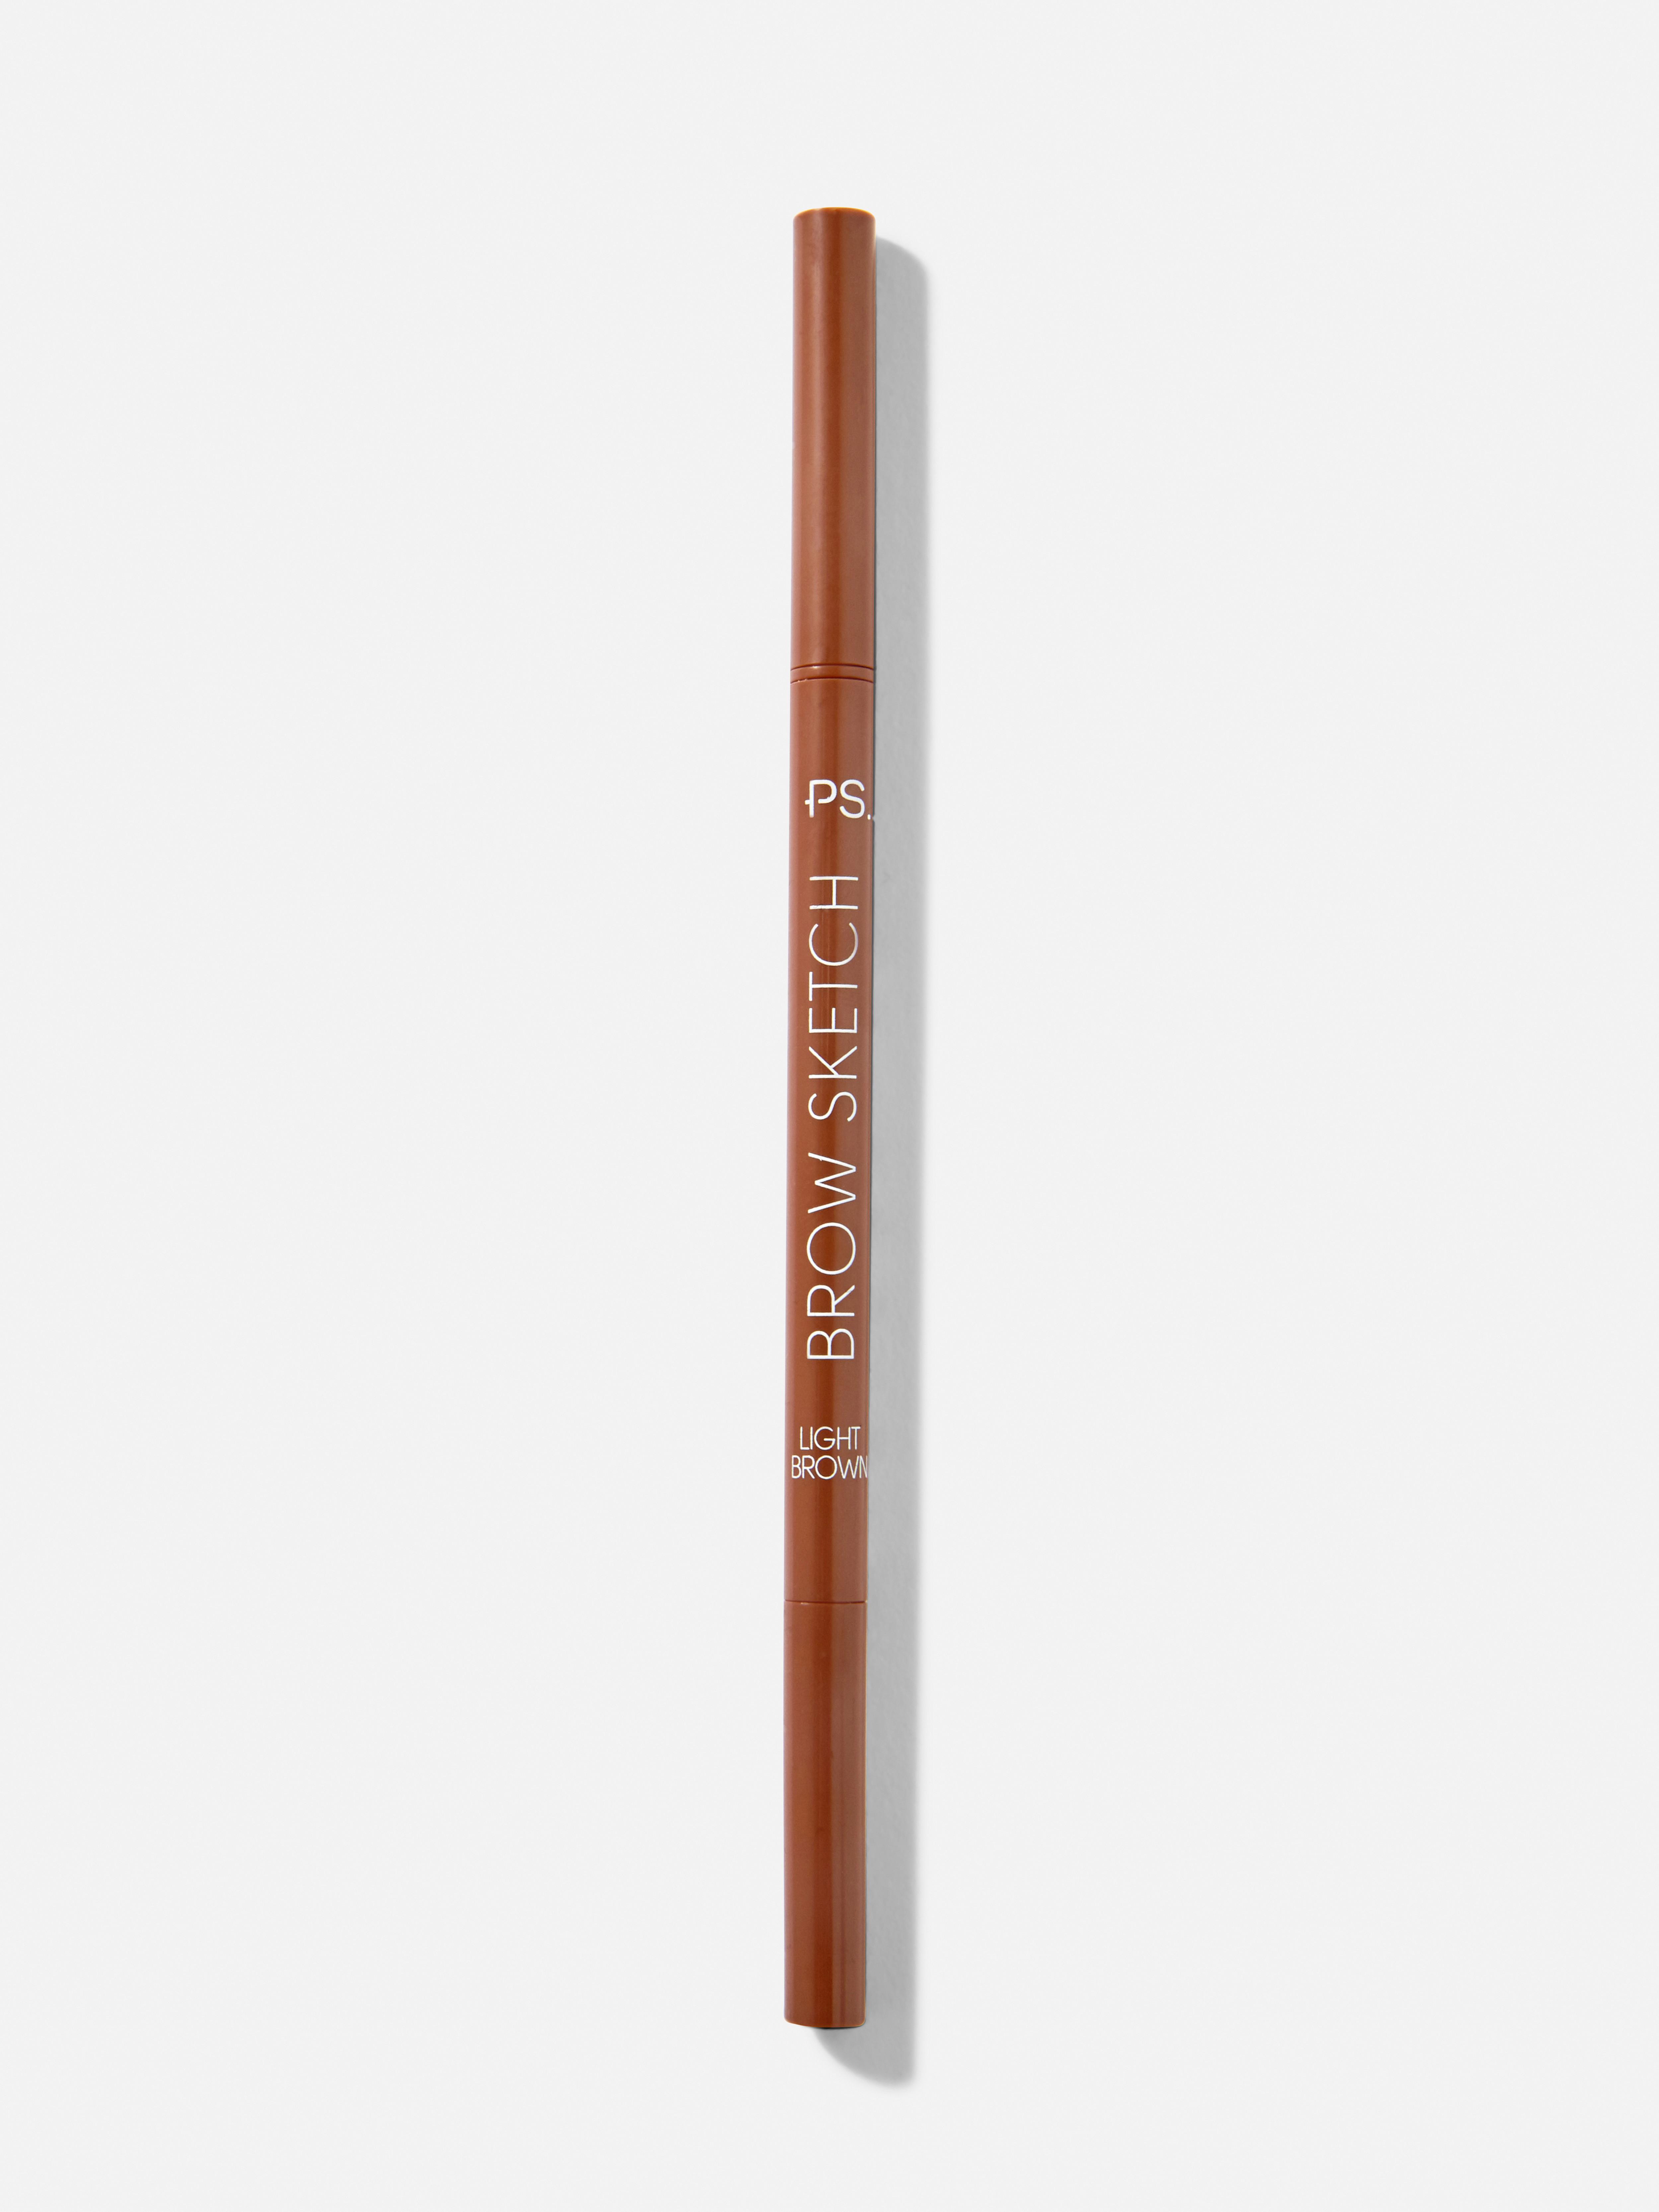 PS... Line Brow Defining Duo